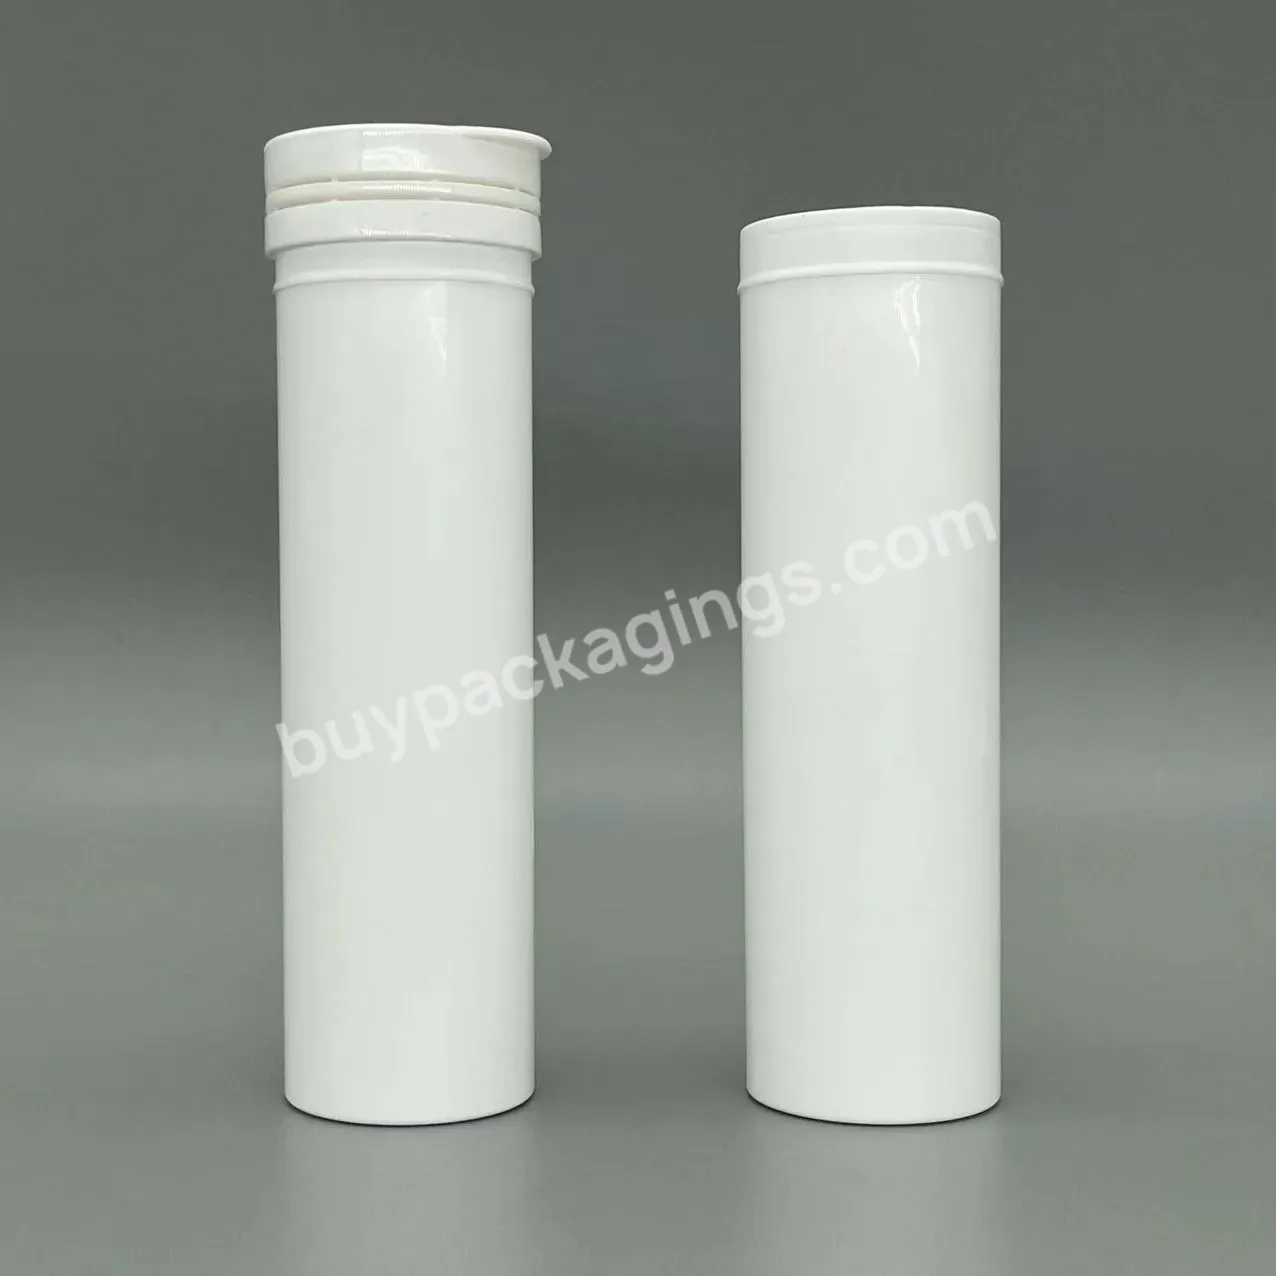 China Price Plastic Bottles For Effervescent Tablets Effervescent Bottle With Heat Printing Recyclable Packaging Tube - Buy Plastic Bottles For Effervescent Tablets,Effervescent Bottle With Heat Printing,Recyclable Packaging Effervescent Tube.